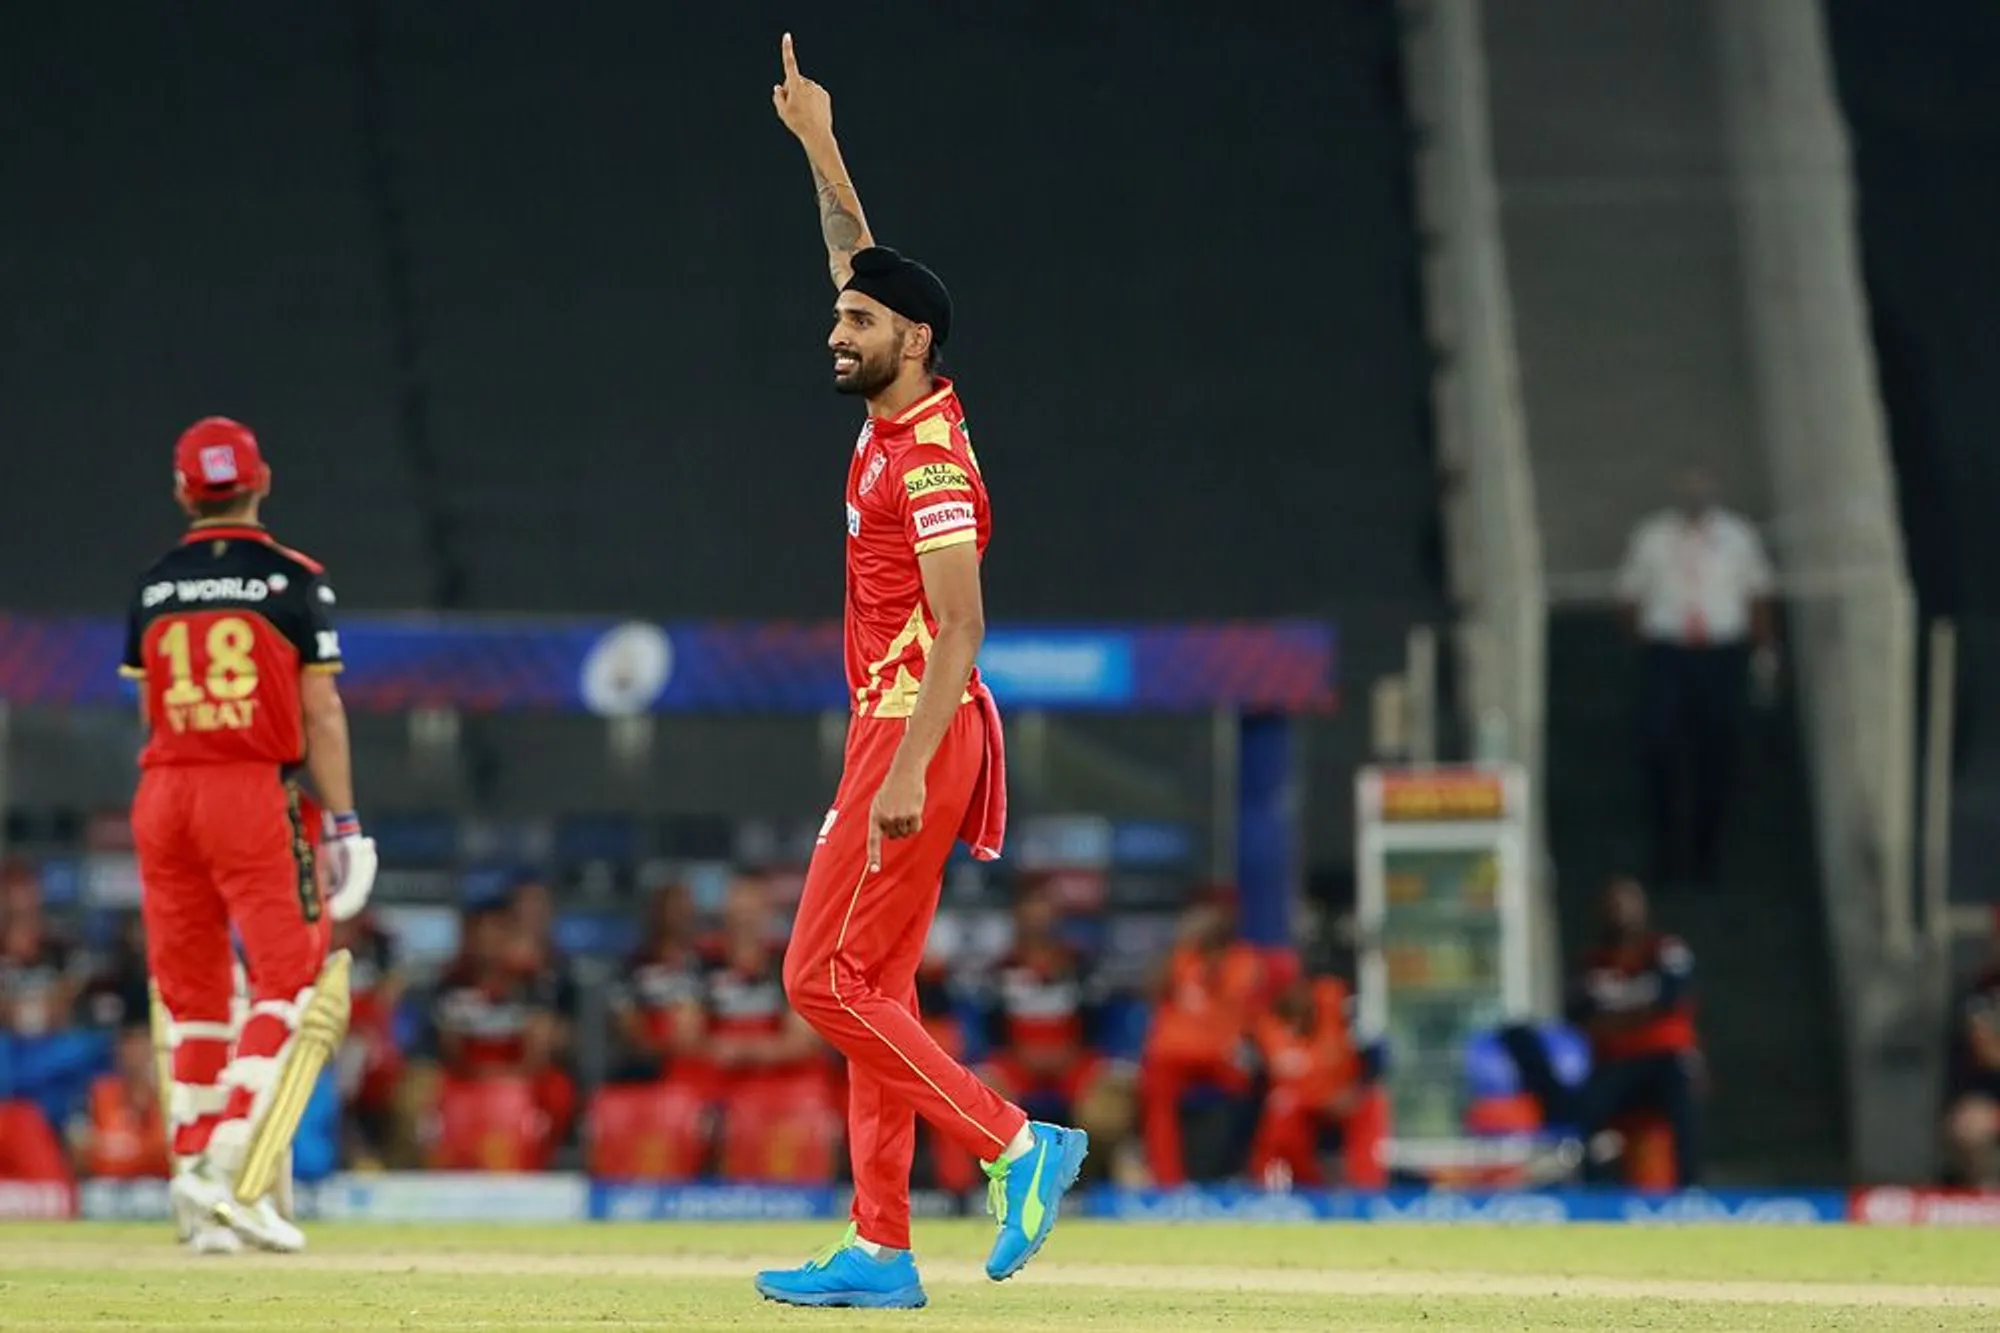 IPL 2021 | My bowling started to flow after ‘very special’ wicket of Kohli, reveals Harpreet Brar